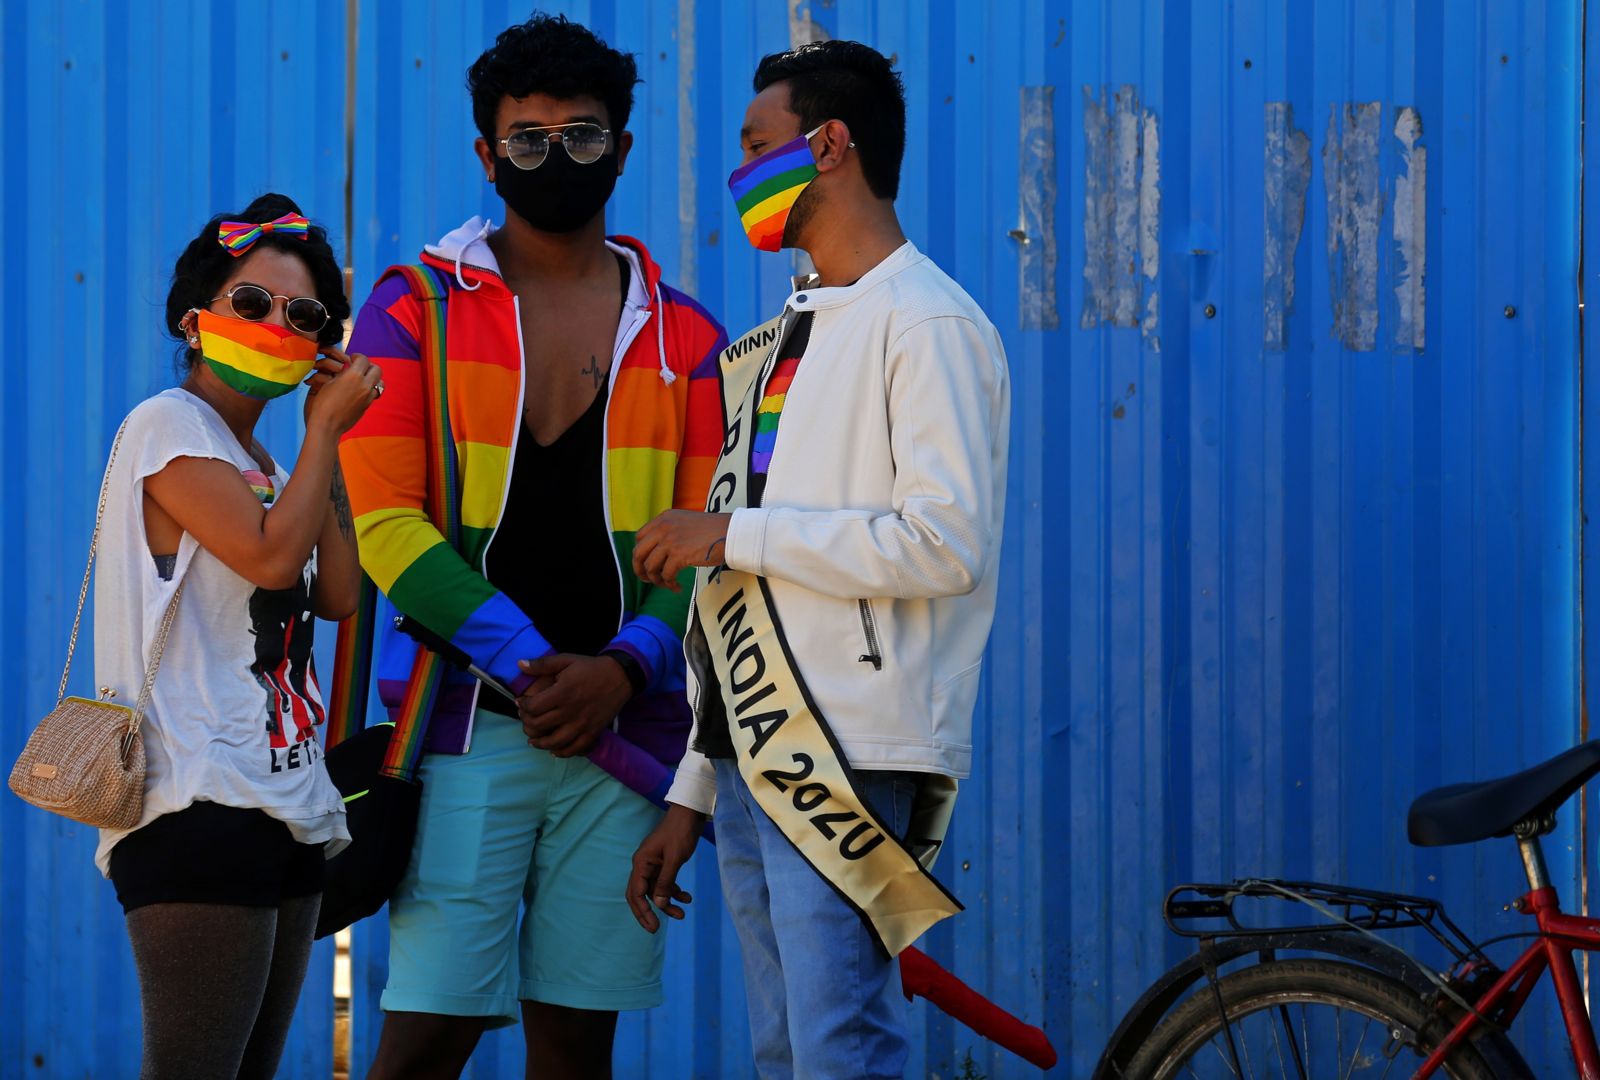 The ban on the practice of ‘curing queer sexuality’ in India